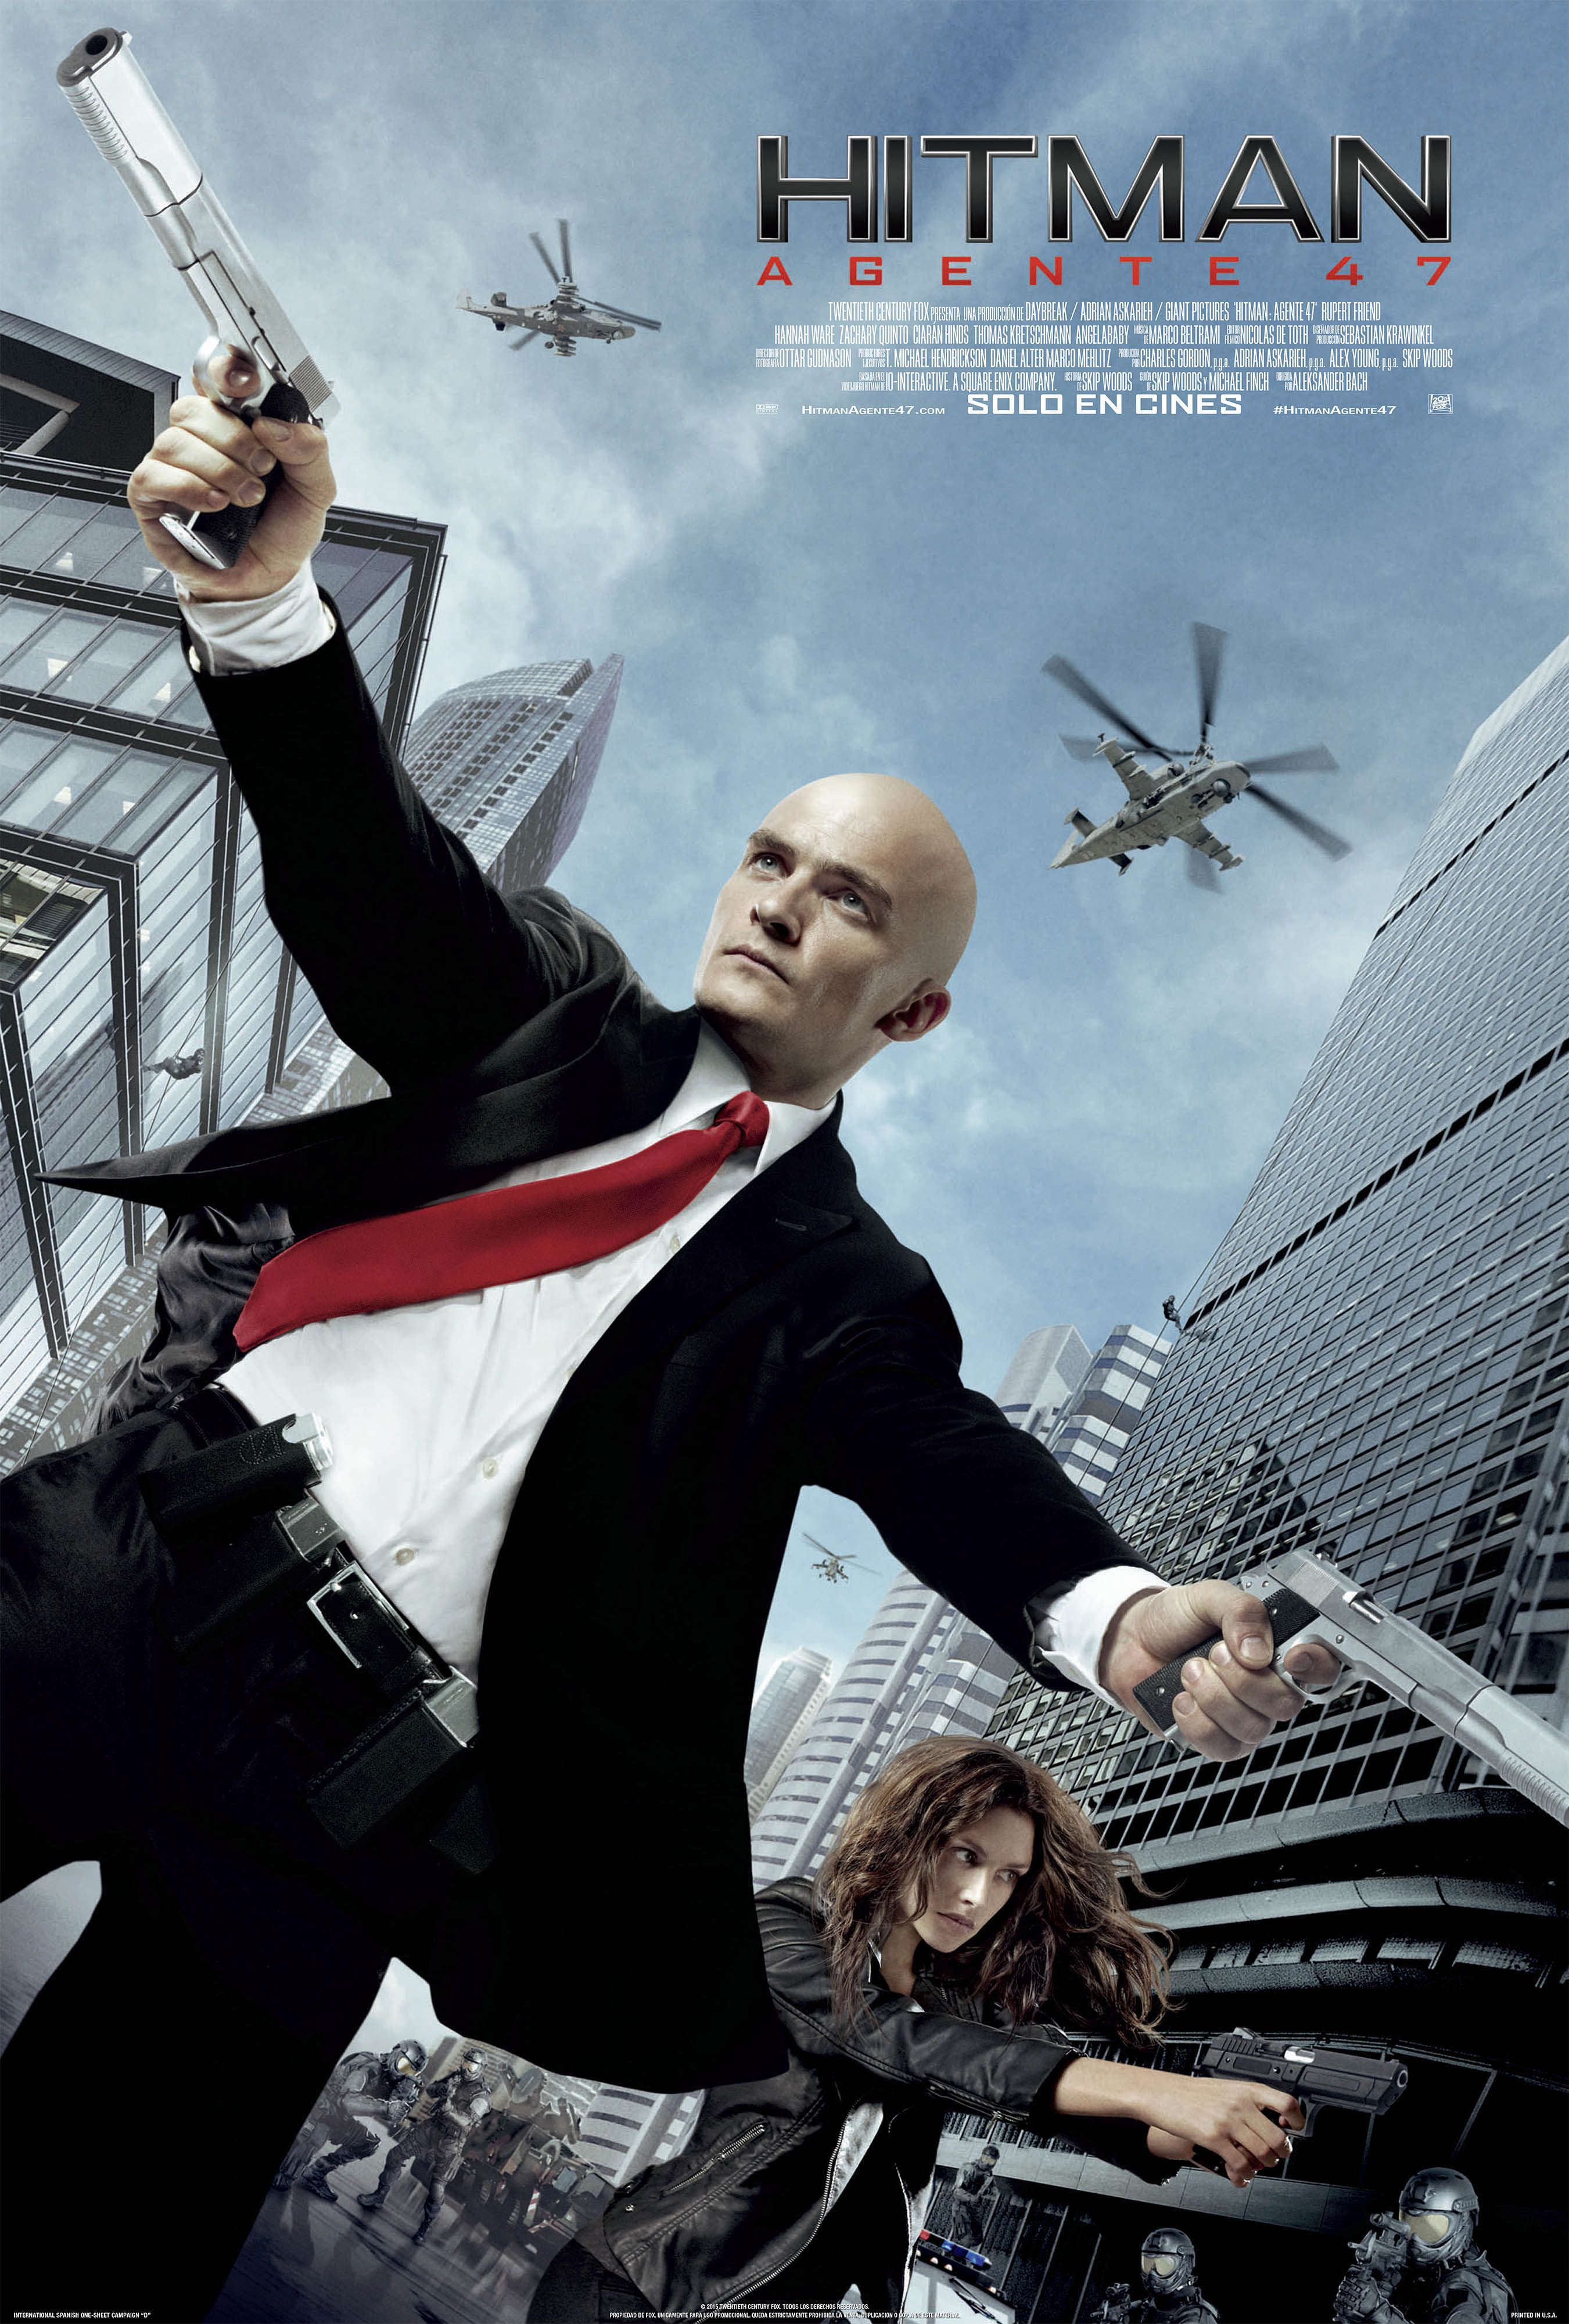 Exclusive: ‘Hitman: Agent 47’ Post-Credits Scene Potentially Sets Up Sequel